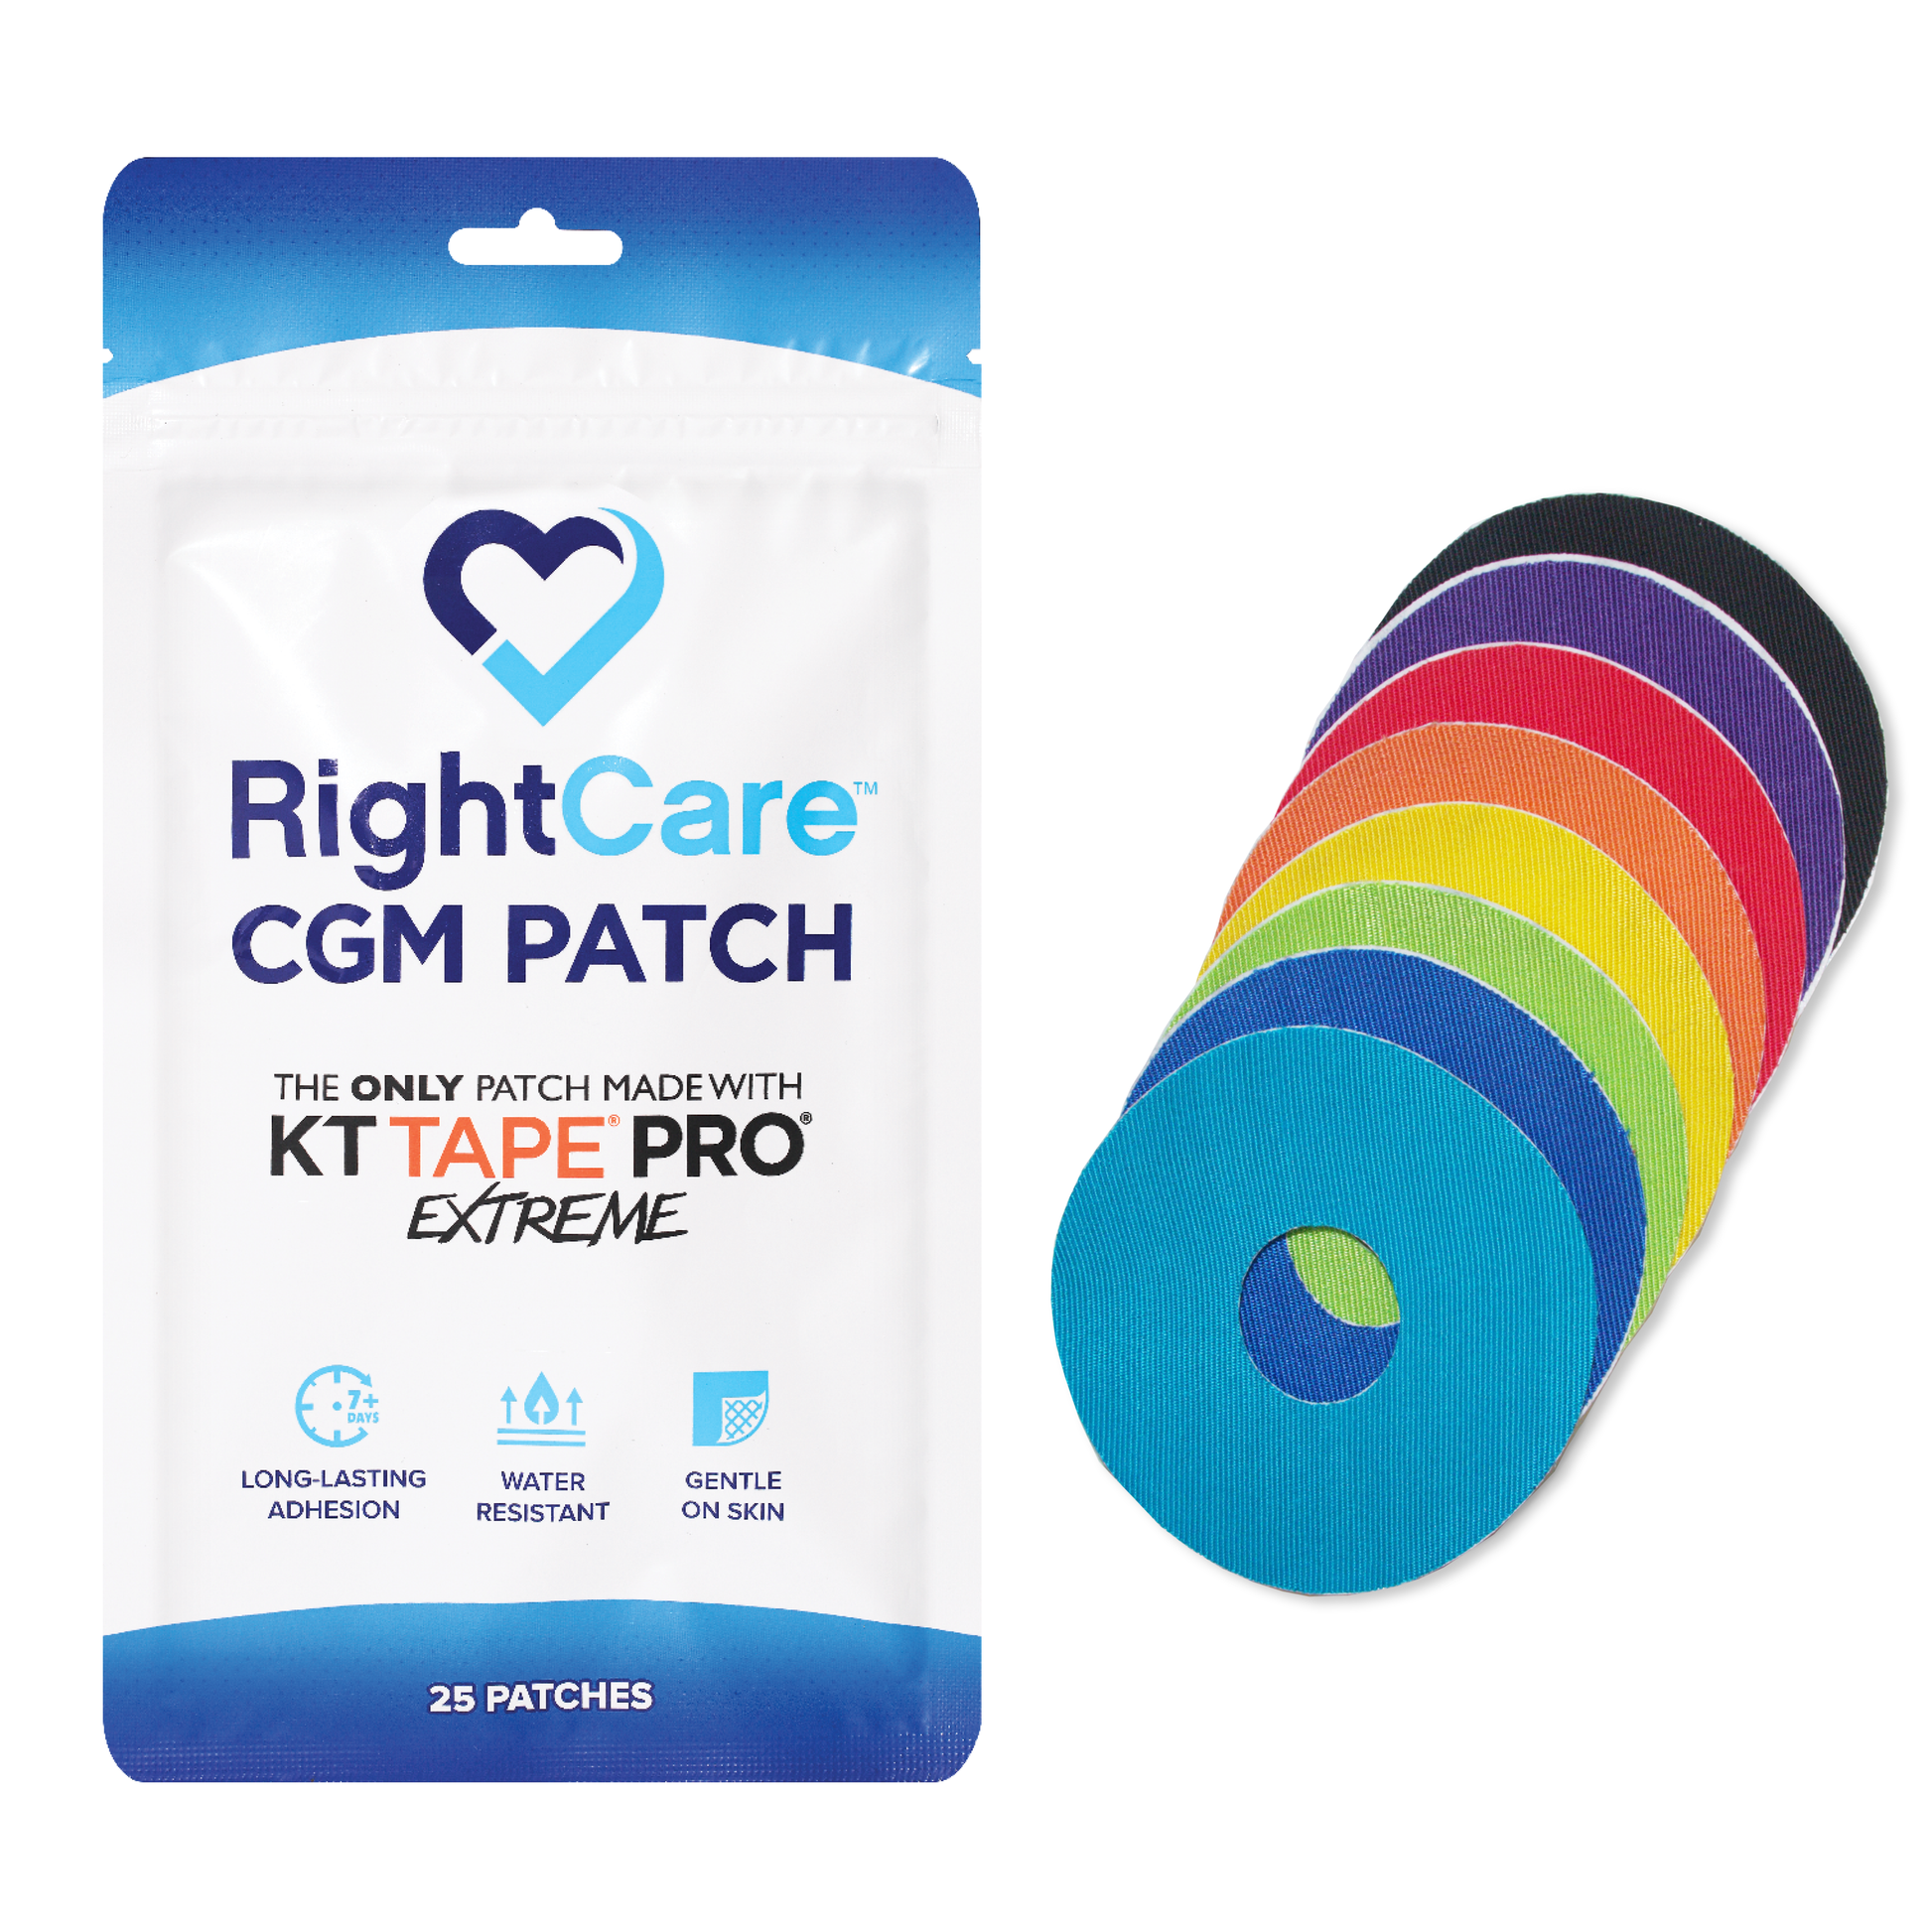 RightCare CGM Adhesive Patch made with KT Tape, Dexcom G7, Bag of 25 30965101